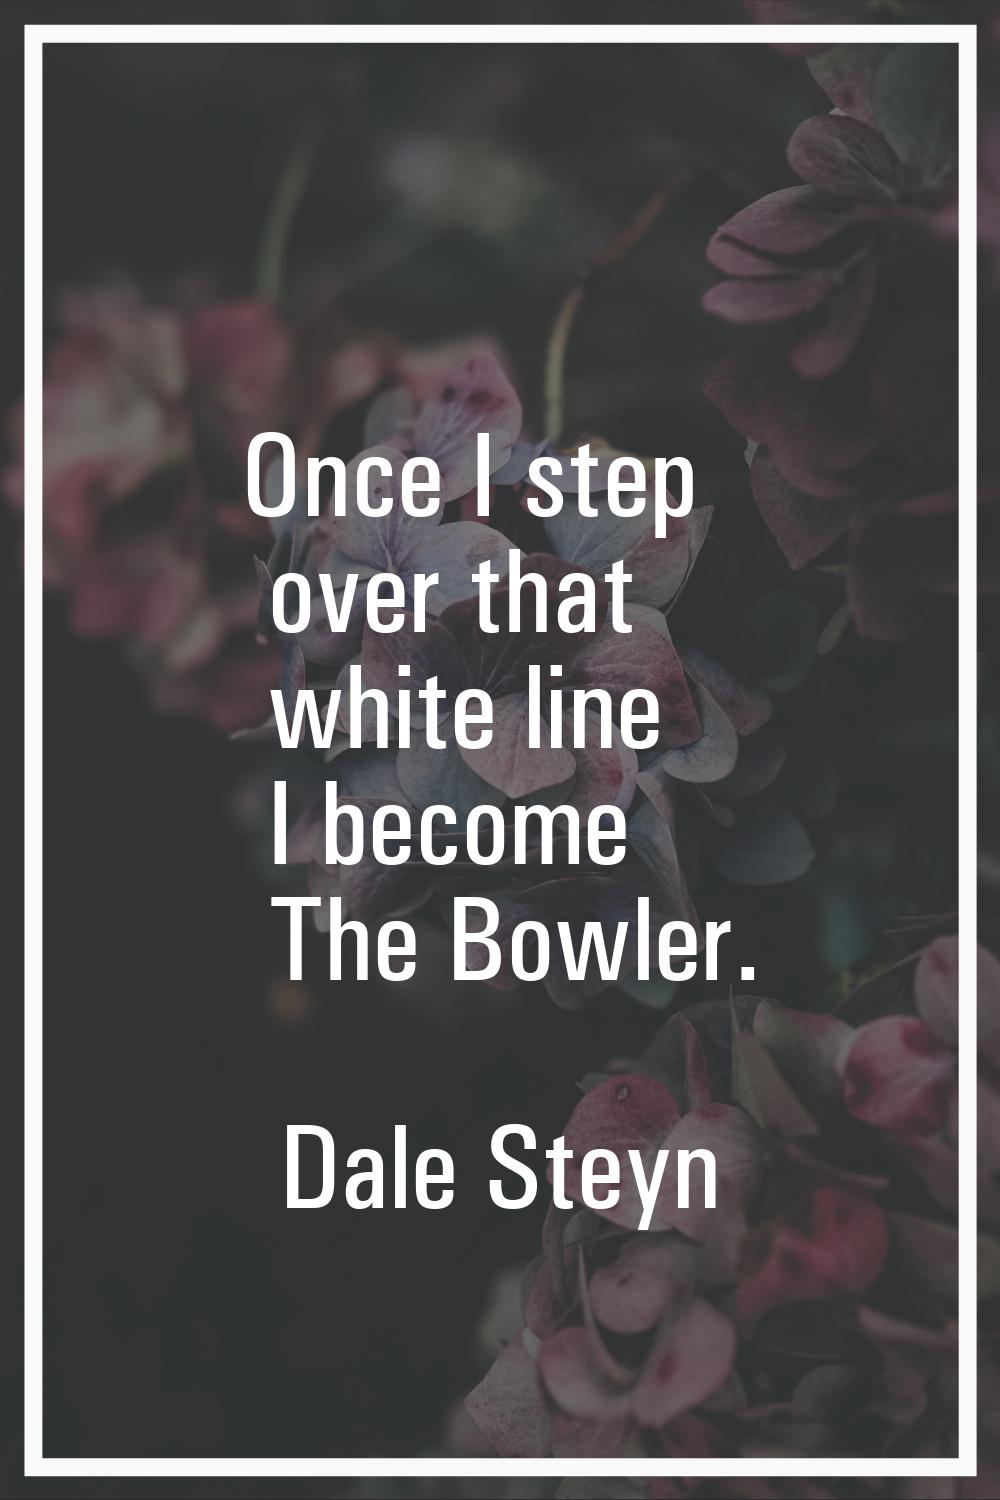 Once I step over that white line I become The Bowler.